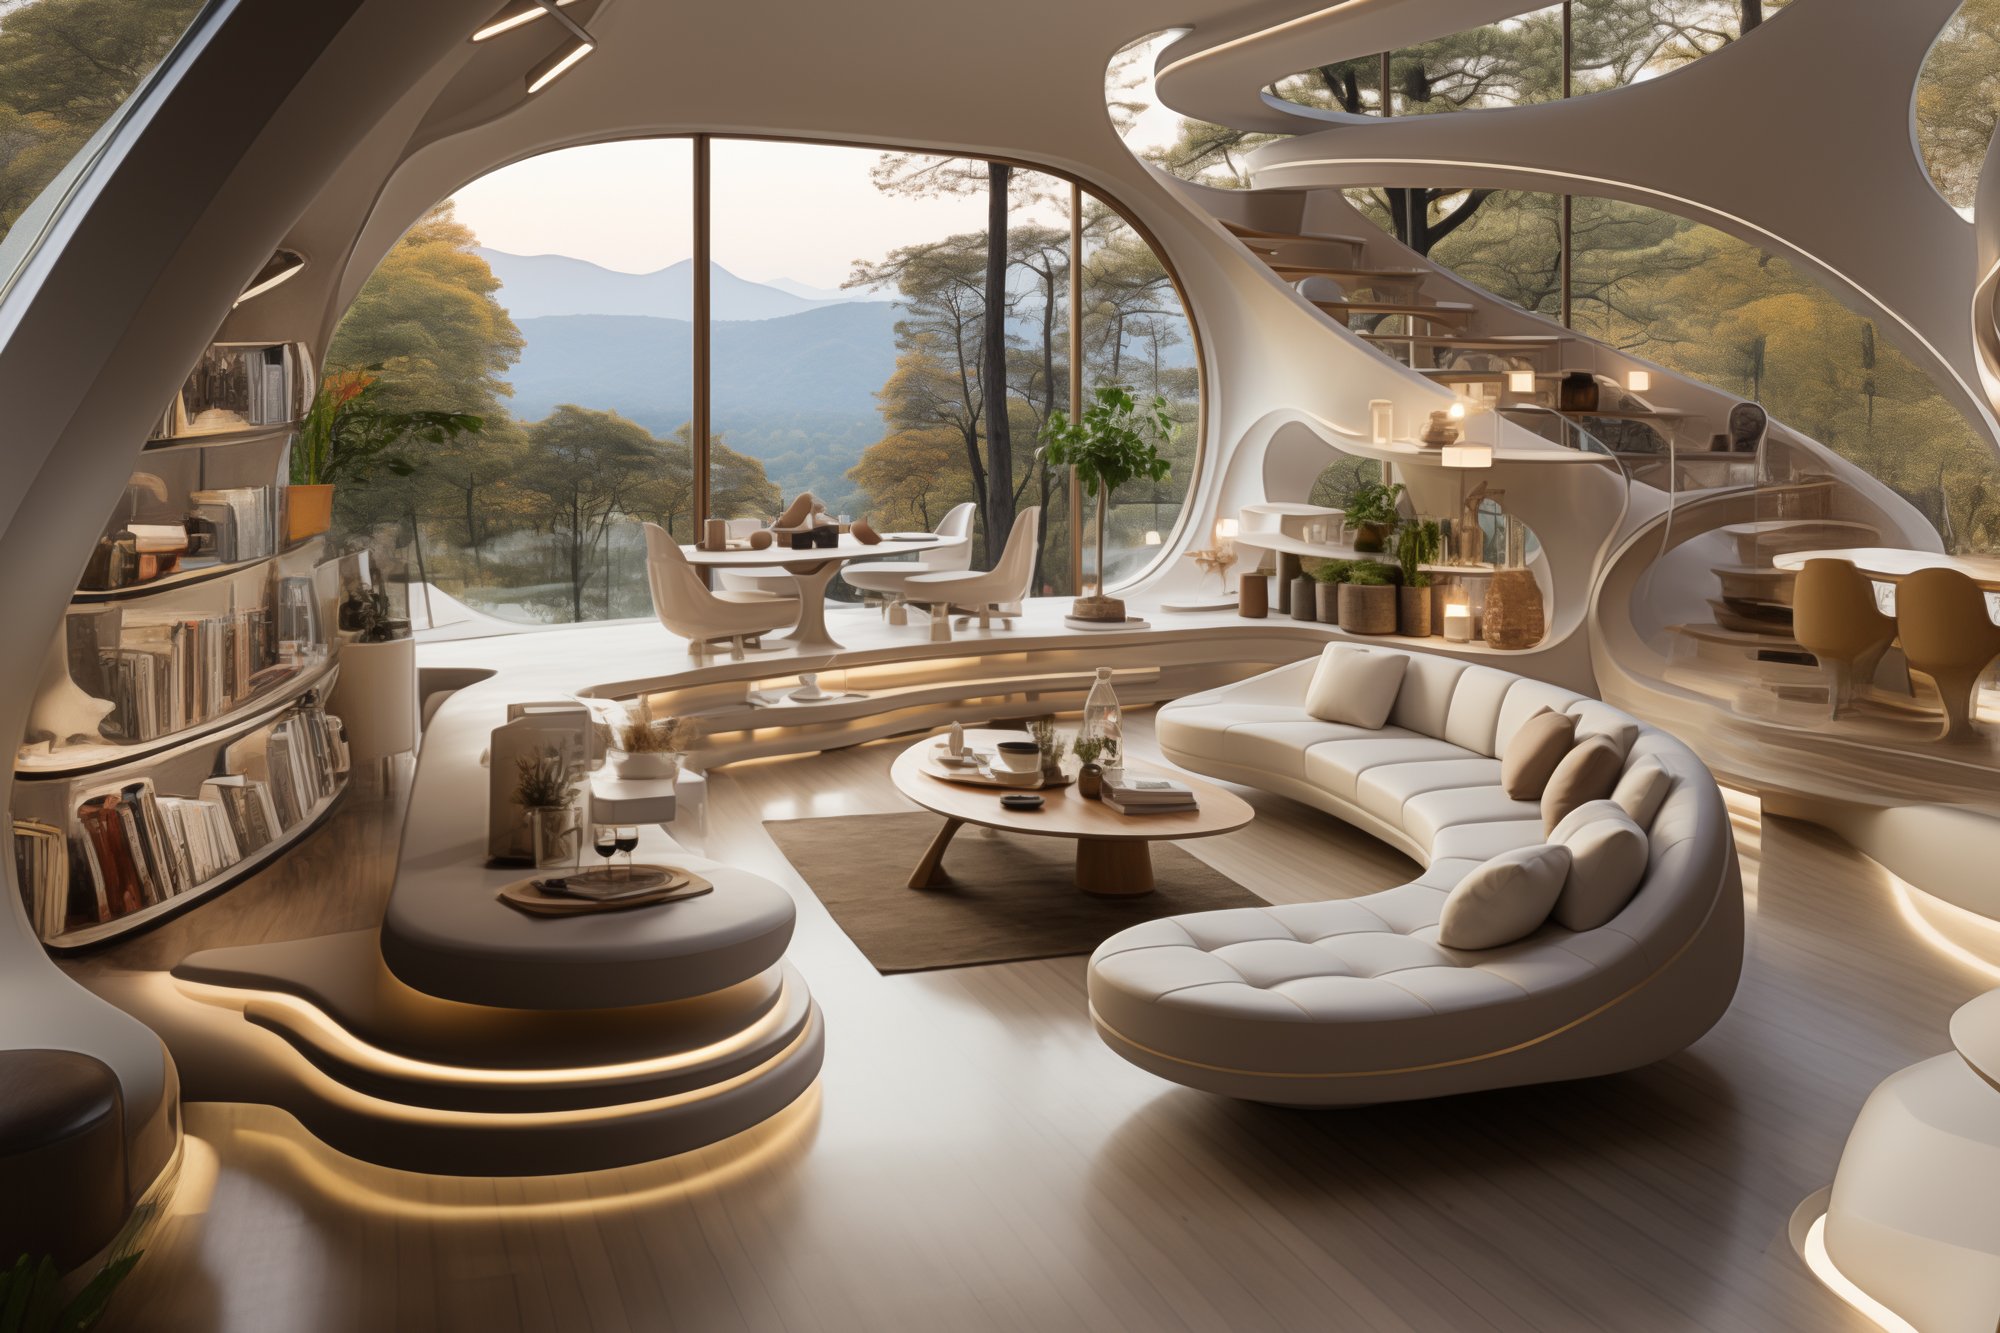 A futuristic interior of a 3D-printed home, showcasing customizable features and bespoke furnishings, surrounded by a scenic natural landscape.